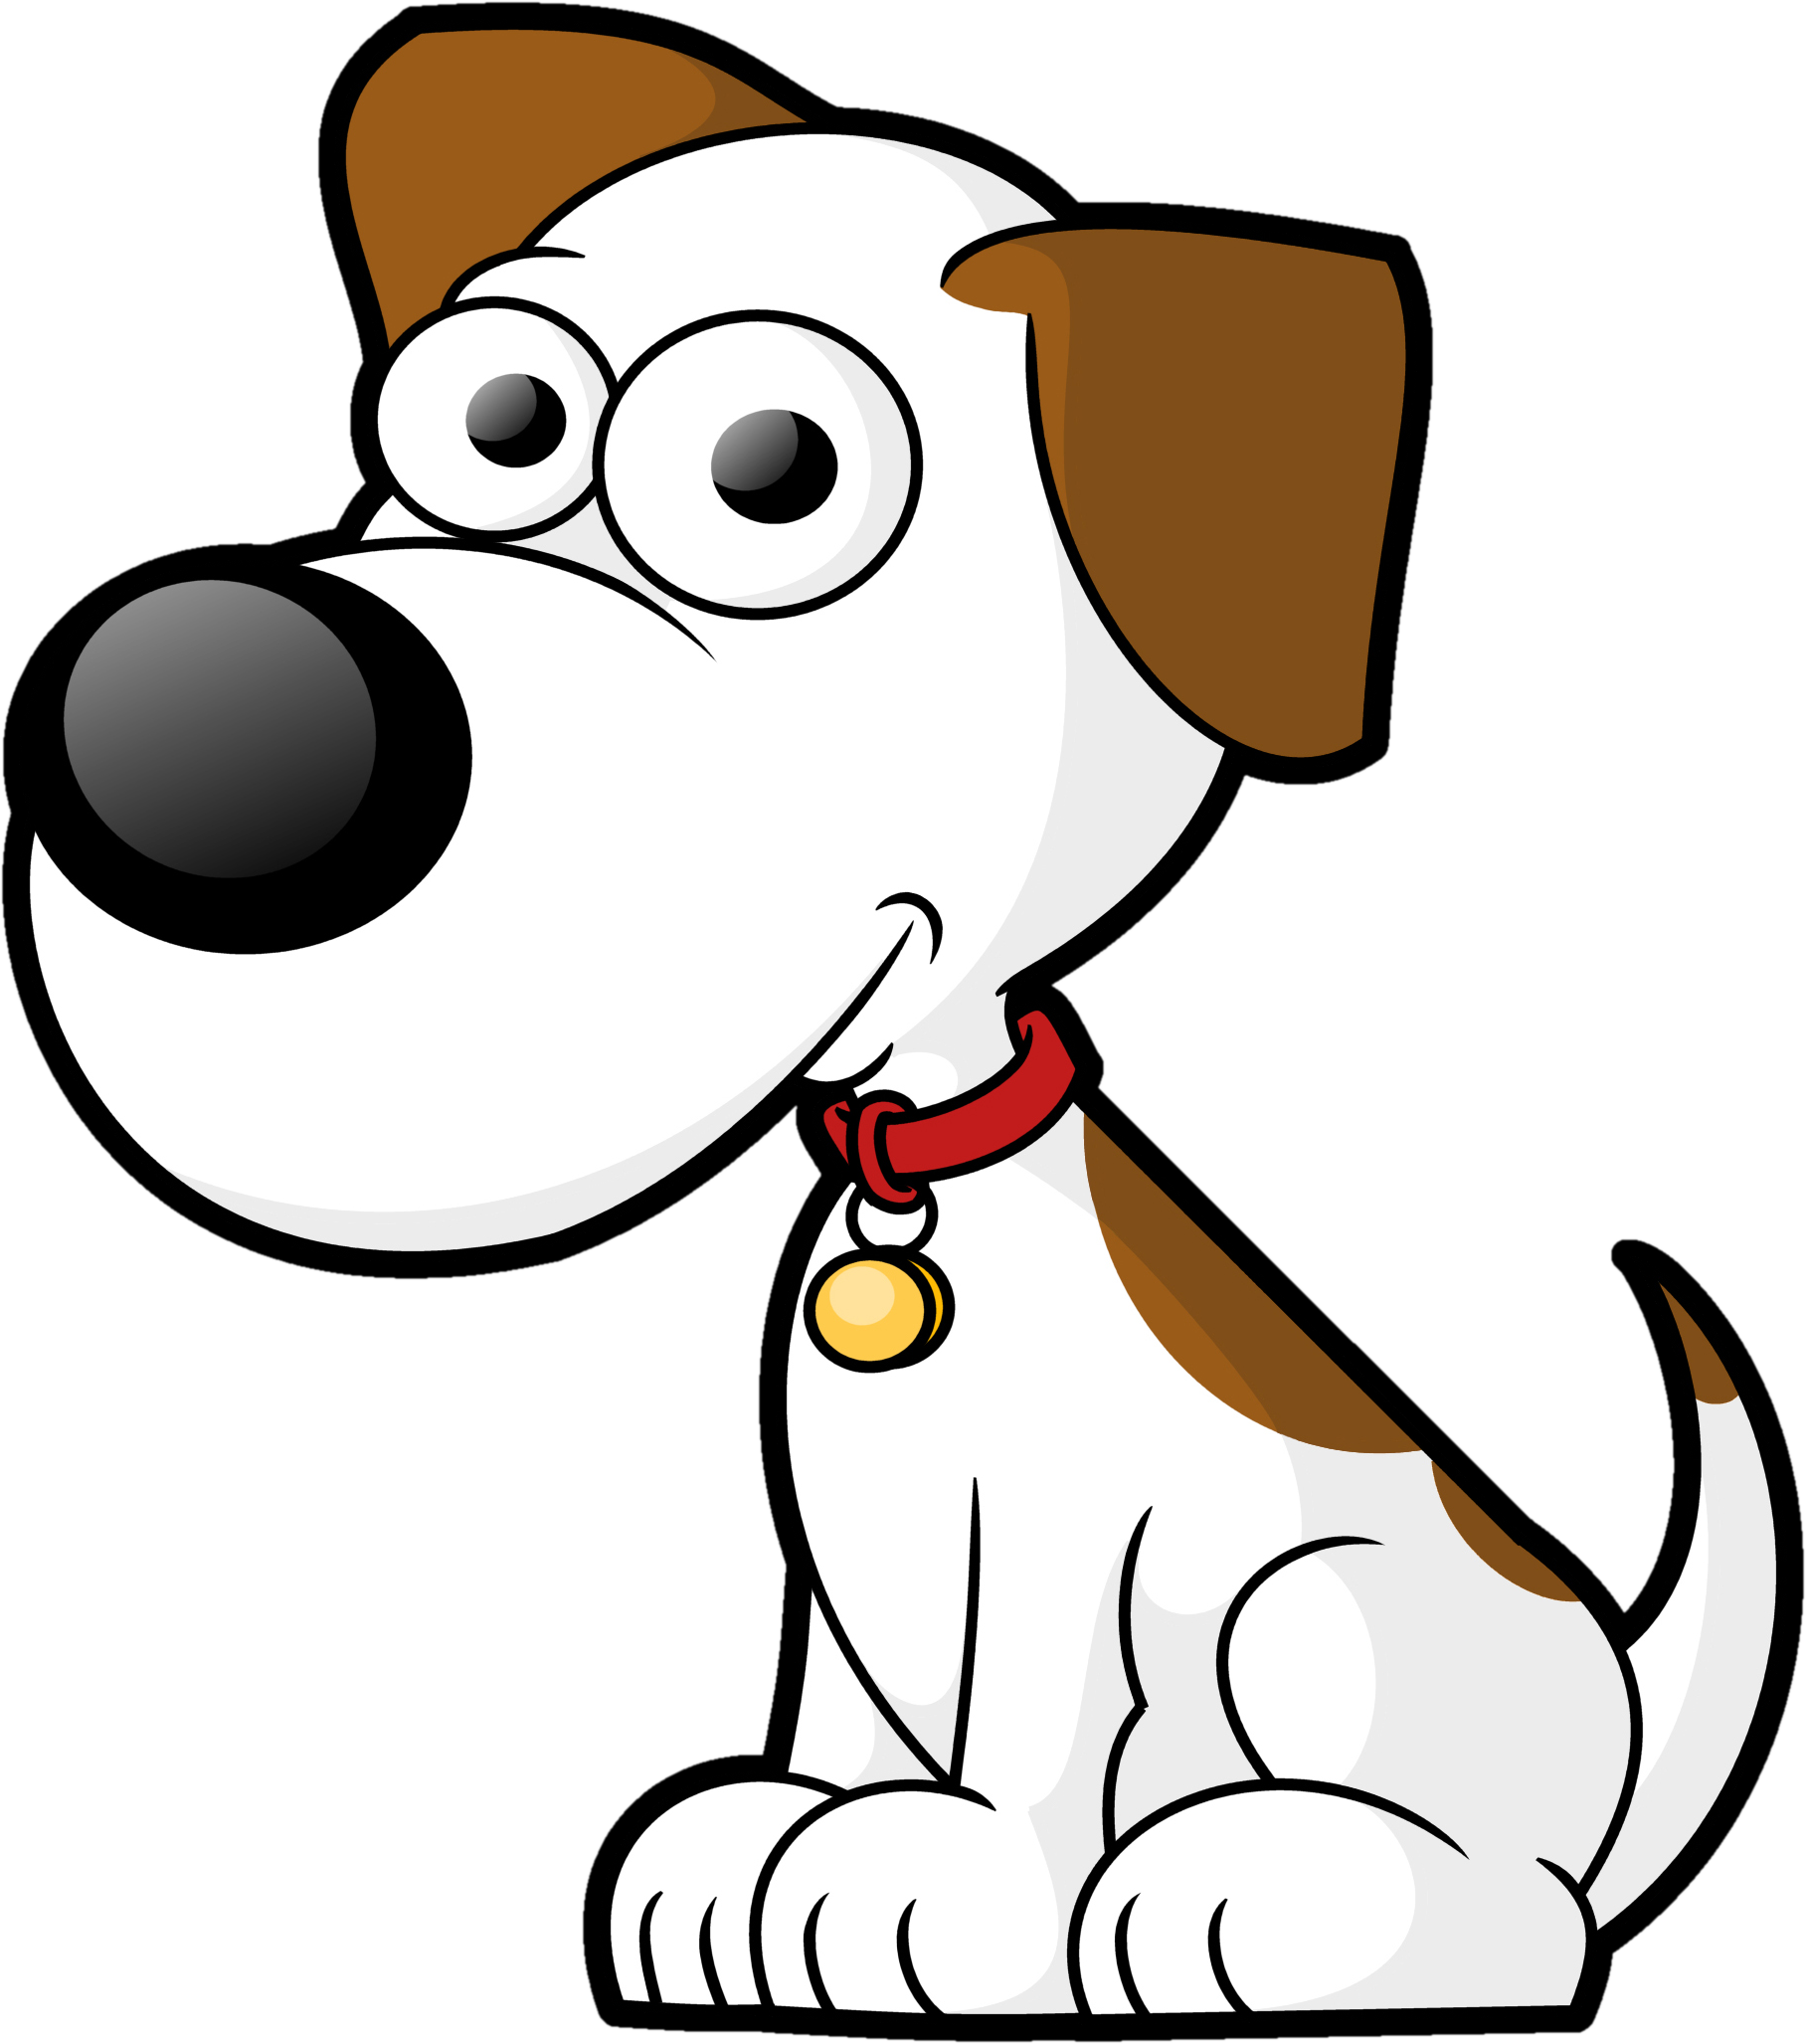 Puppy Cartoon Clipart - Cliparts and Others Art Inspiration